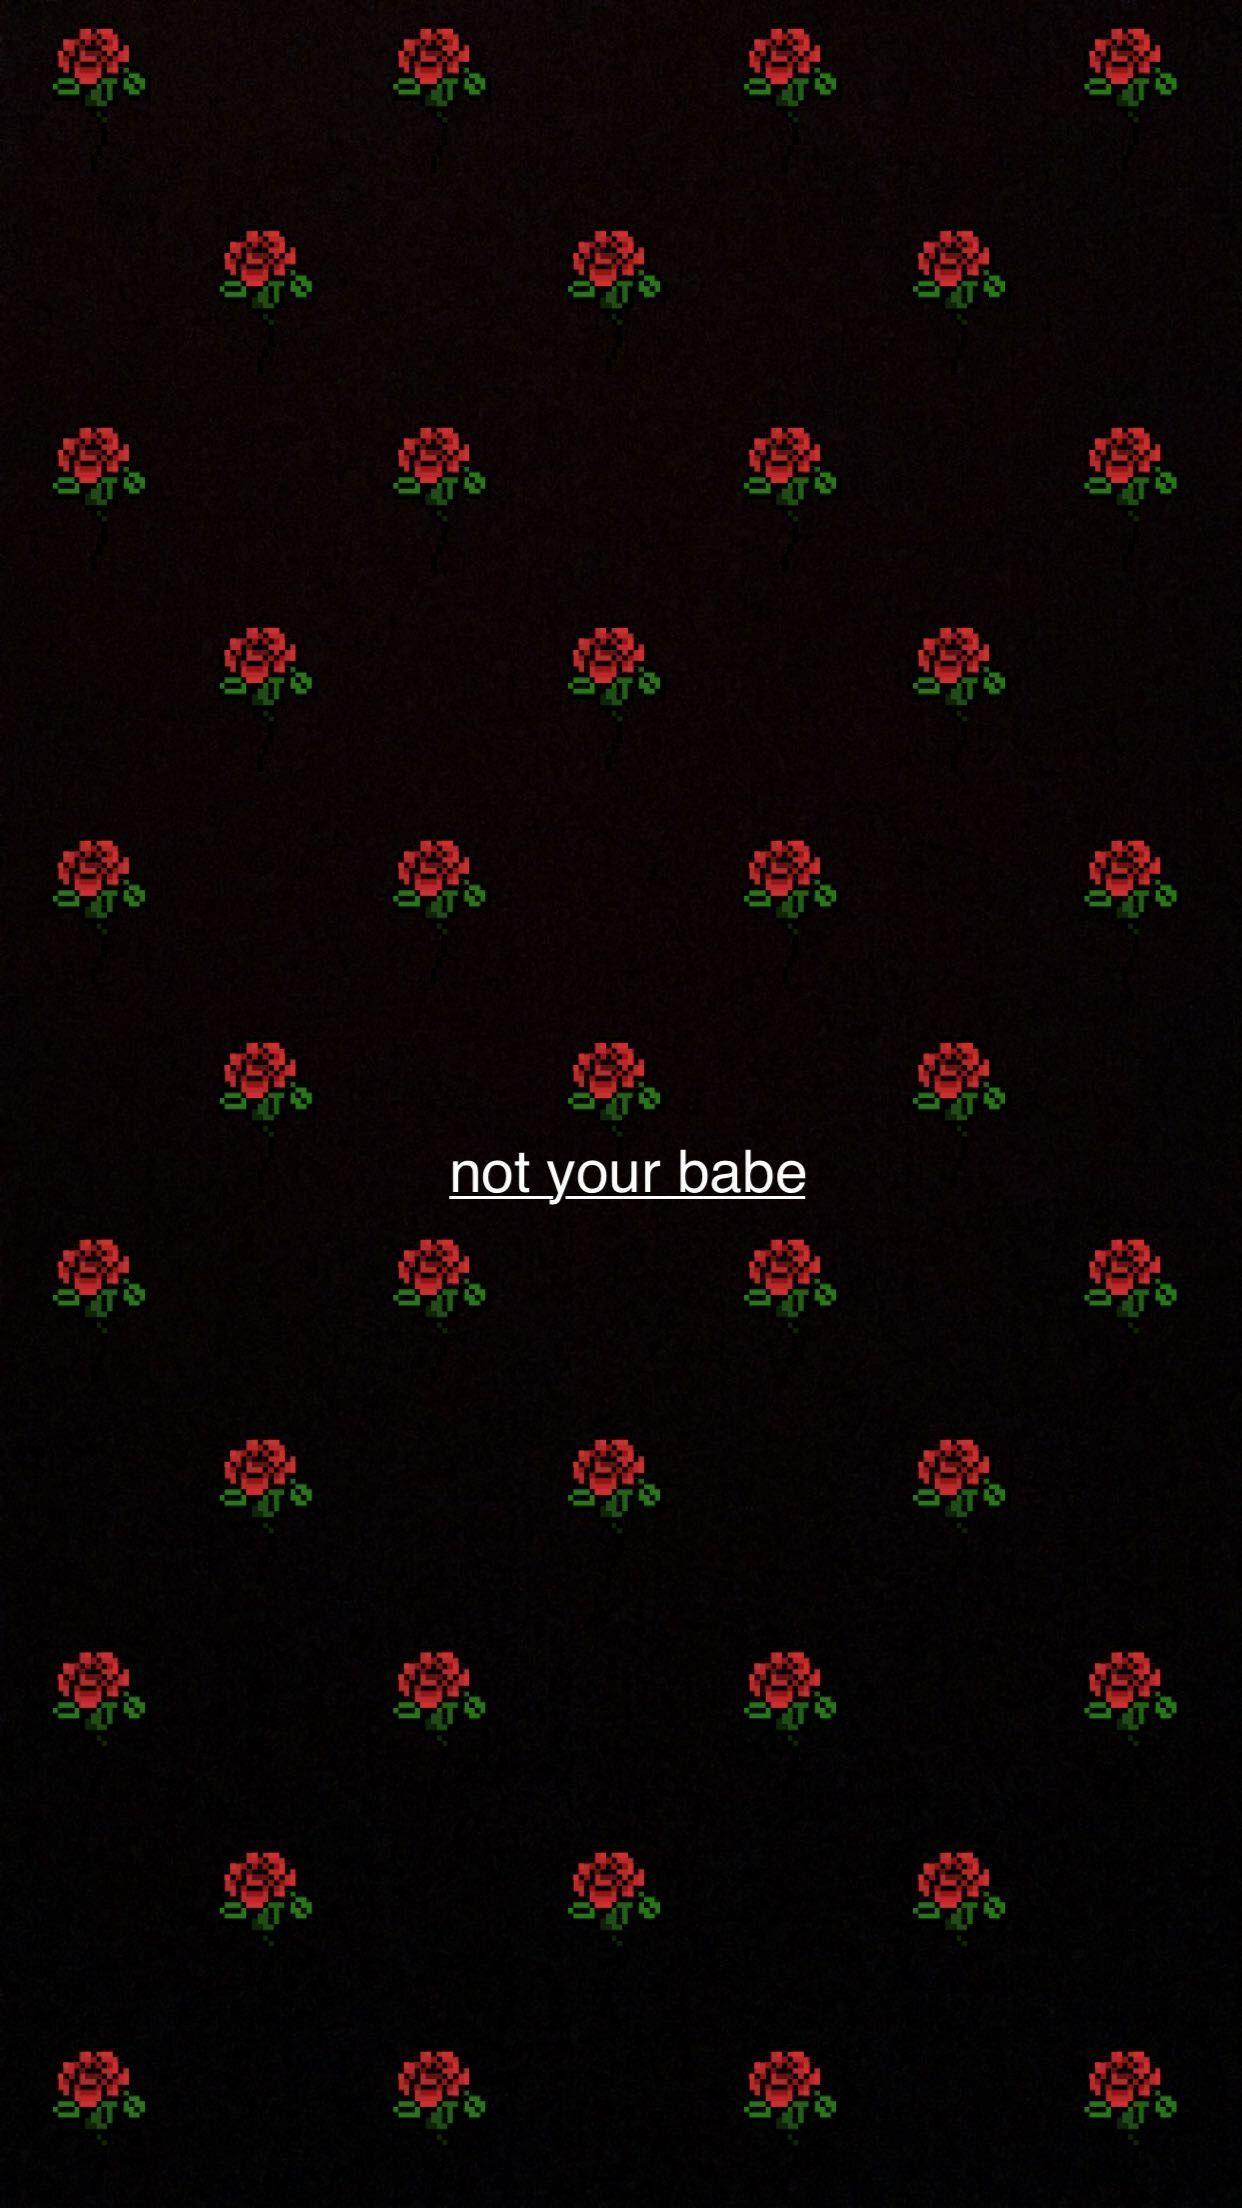 A black background with red roses on it - Baddie, cool